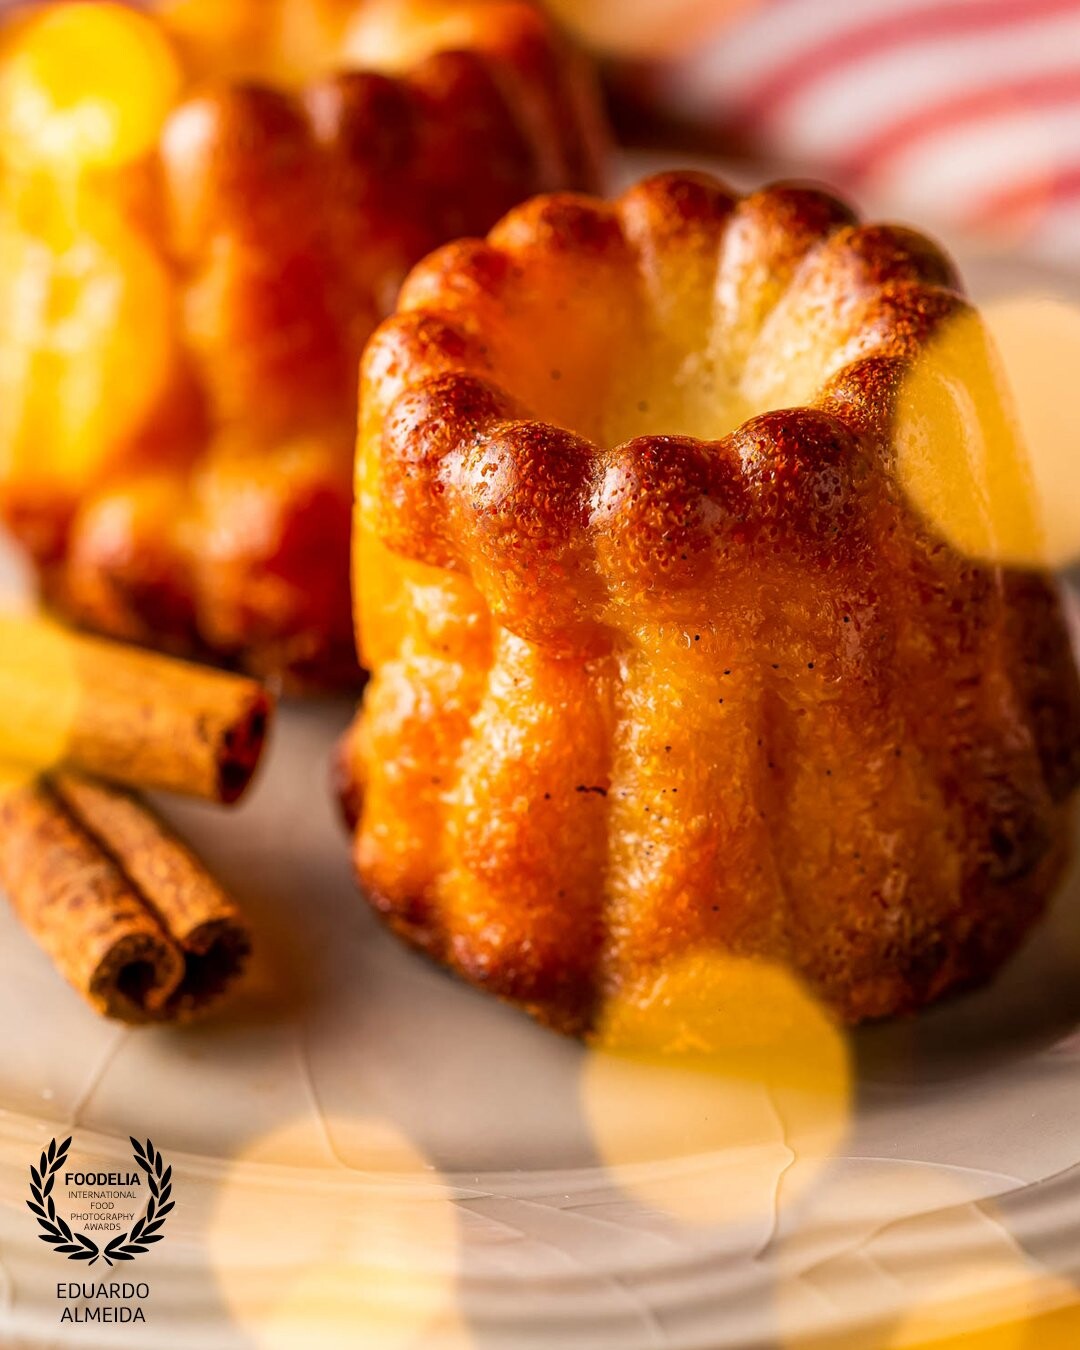 Canele are typically served warm, and are often enjoyed as a sweet treat with coffee or tea. They can be found in bakeries and patisseries throughout France, and are a staple of the Bordeaux culinary scene.